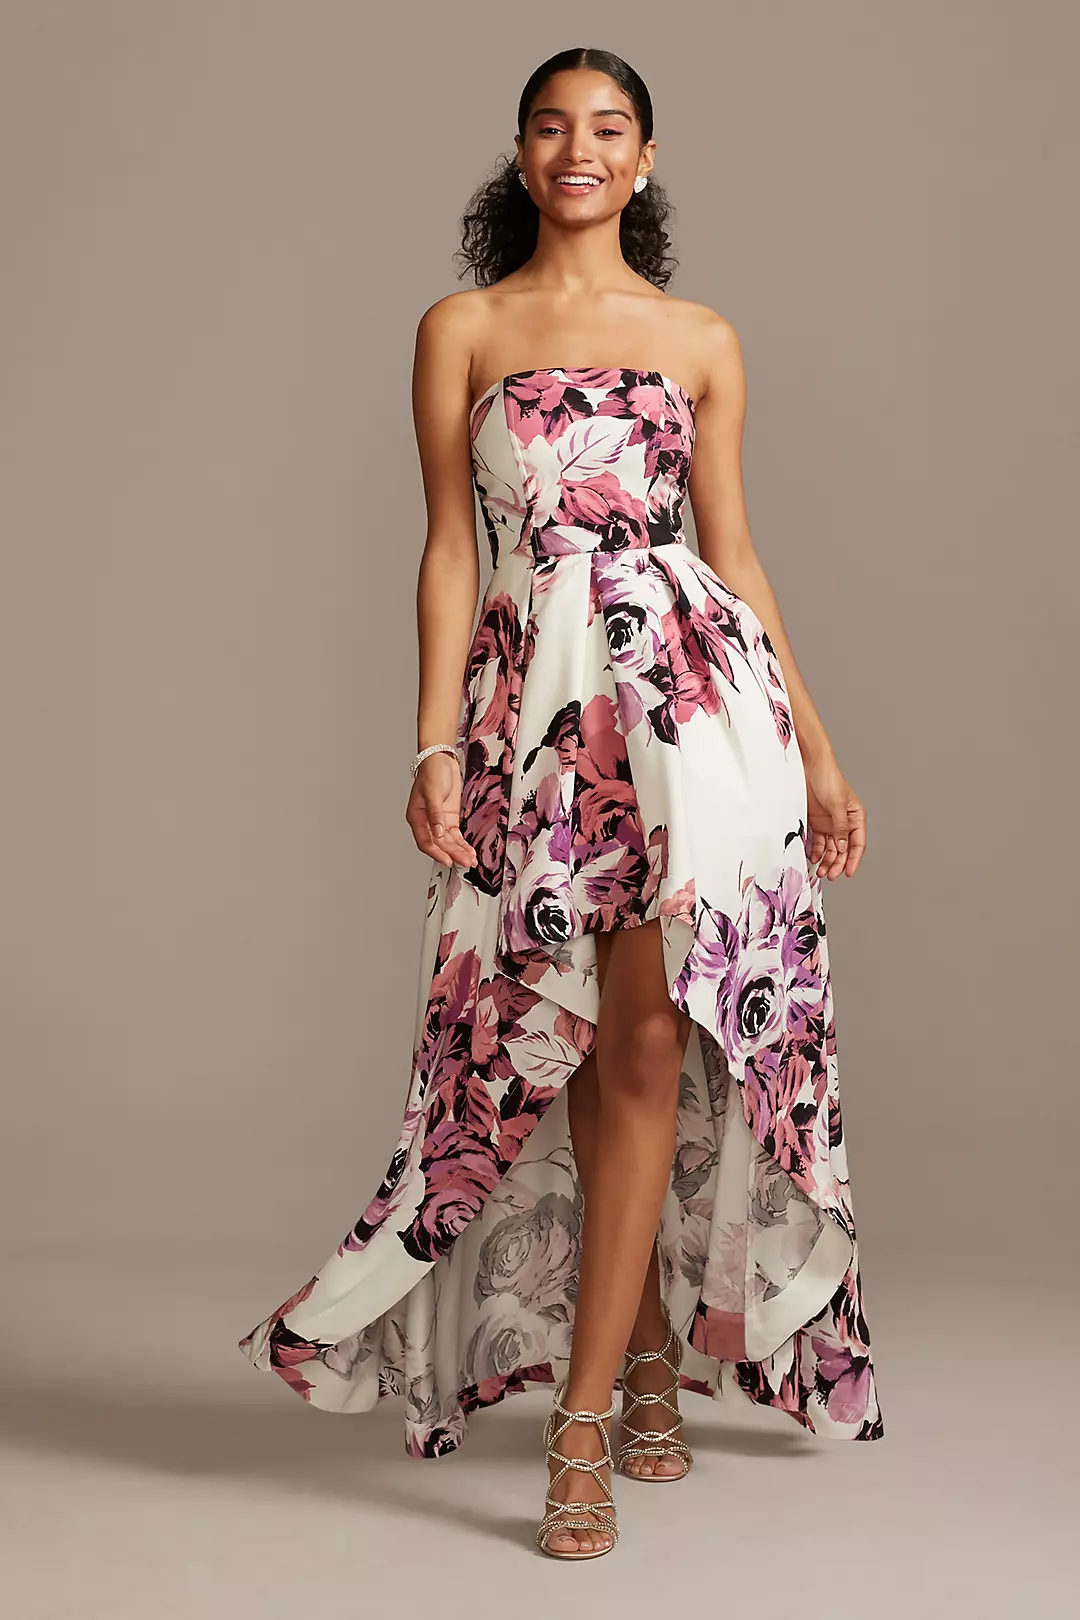 Strapless Floral High-Low Ball Gown Image